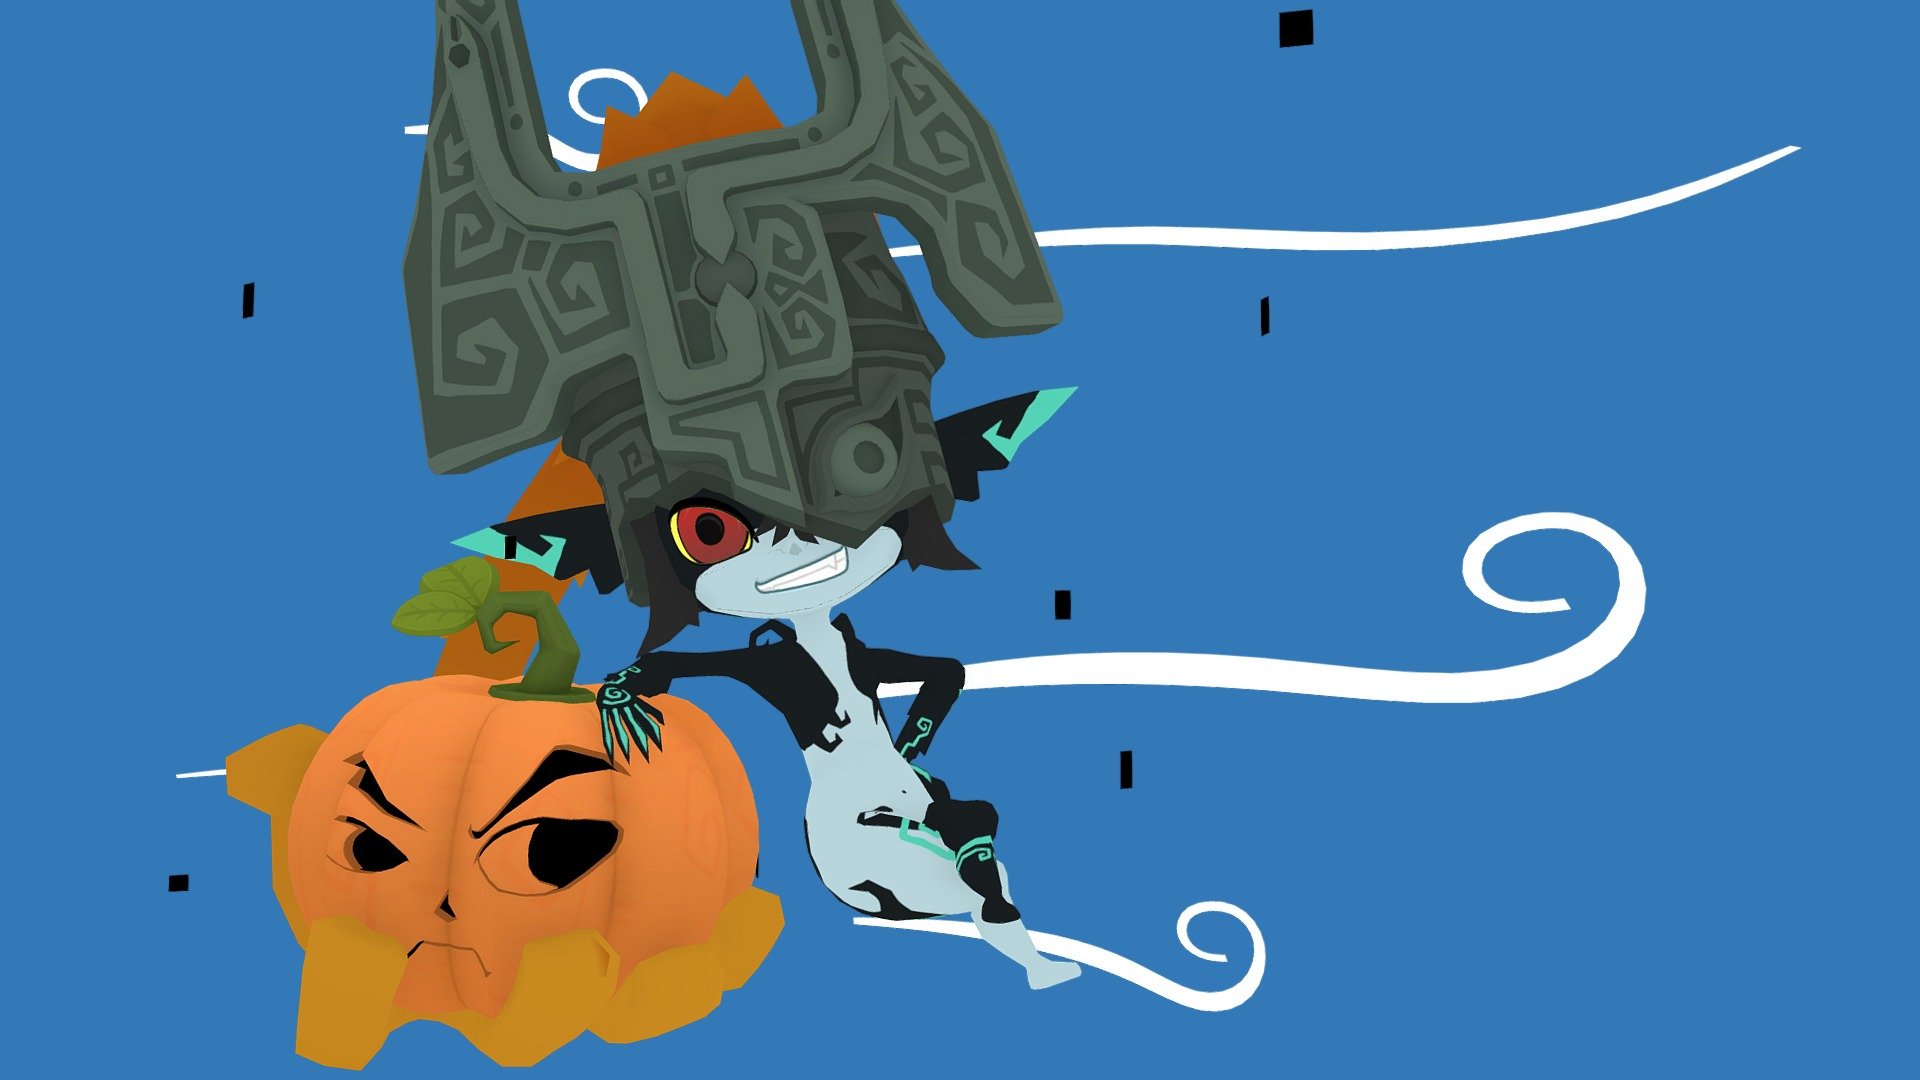 HAPPY HALLOWEEN! Here's a little spooky scene for the spooky season! It's Midna stylised as if she was in Zelda: Wind Waker! Had a bunch of fun making this during Twitch streams! Feel free to check out my profile, I'm a Vtuber now lol (I made the avatar and the program it's running on!) - Midna Wind Waker - 3D model by Eriction (@erictahiri) 3d model